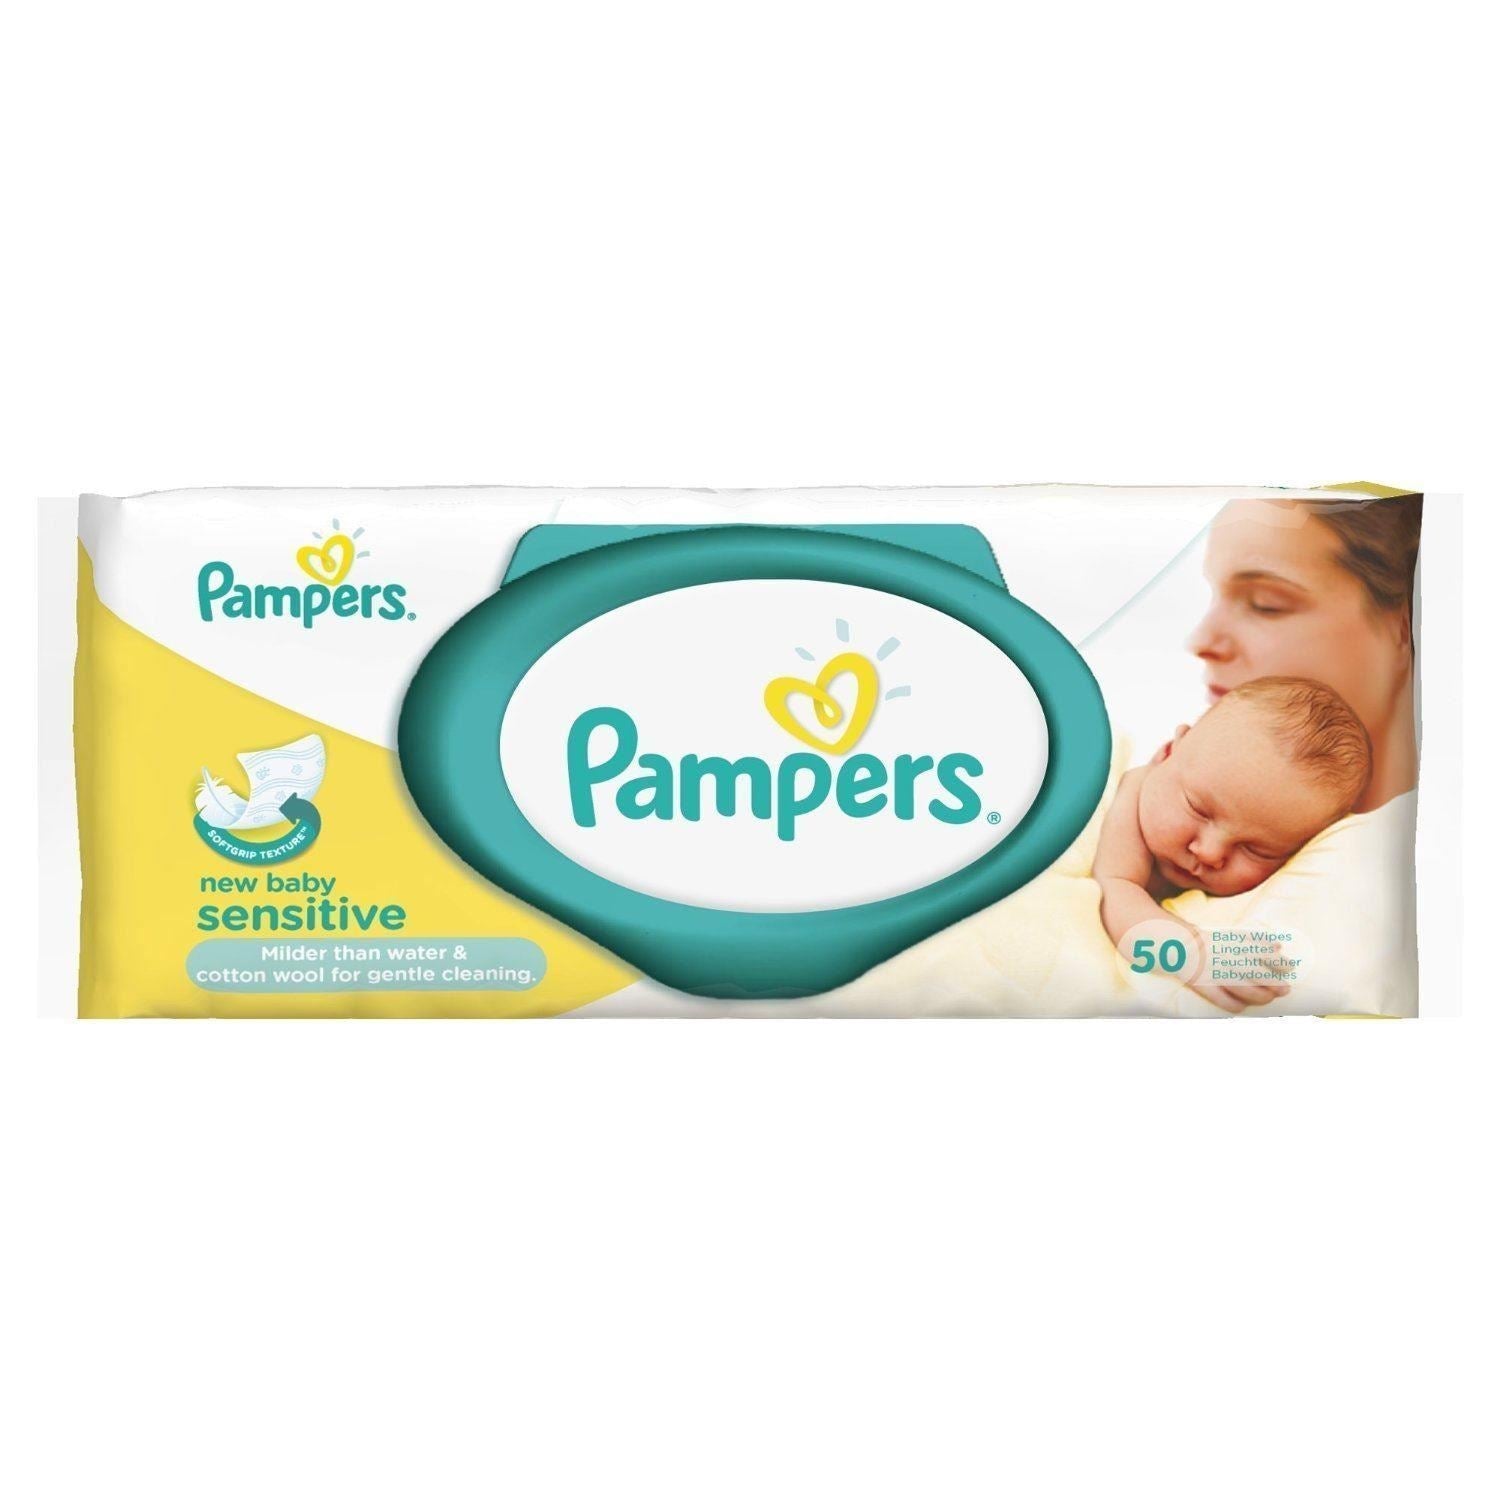 Pampers Baby Wipes Sensitive New Baby 50 unités - (Origine Allemagne)